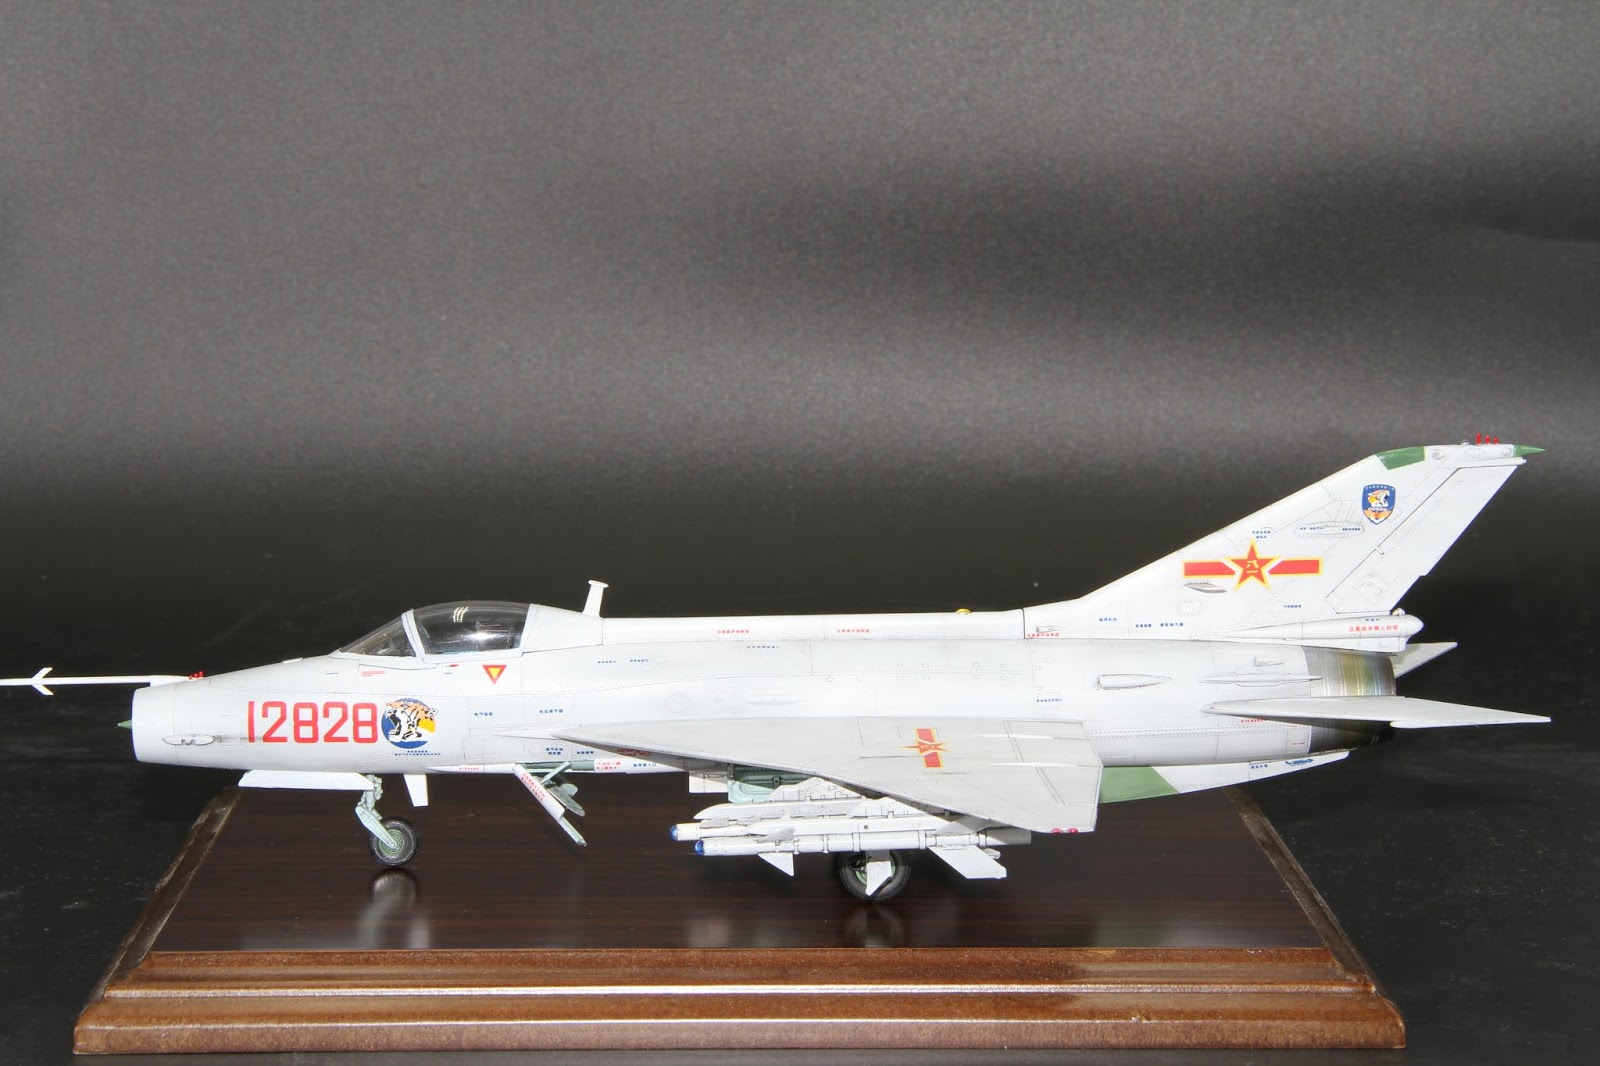 Tommy S Fantastic Models World Trumpeter 1 48 J 7g Chinese Airforce Built From March July 16 Finished